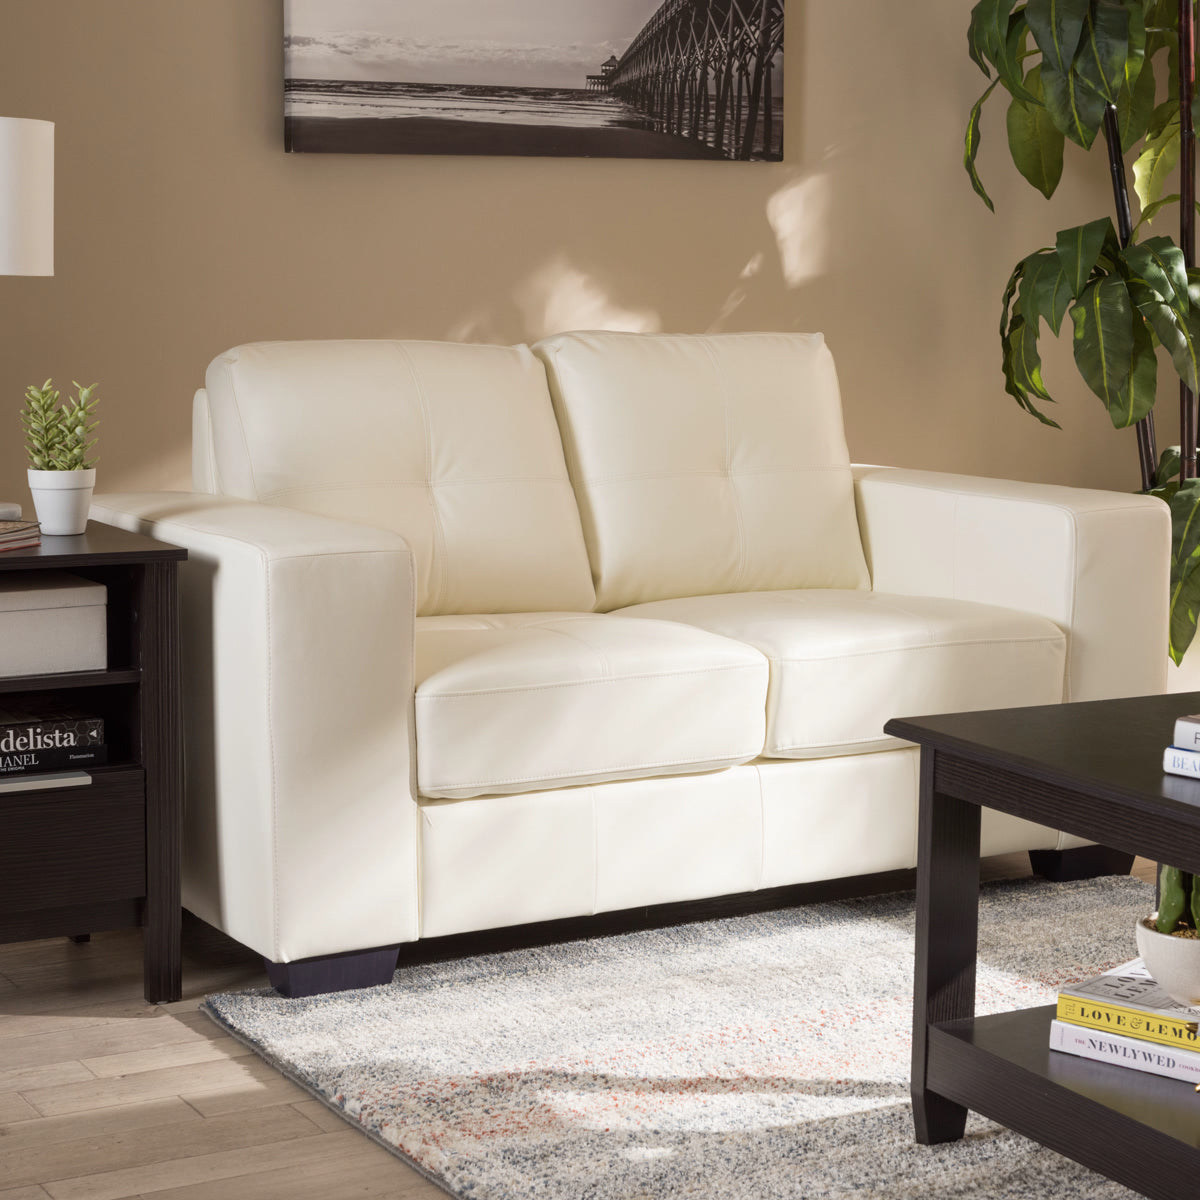 Baxton Studio Adalynn Modern and Contemporary White Faux Leather Upholstered Loveseat Baxton Studio-sofas-Minimal And Modern - 7